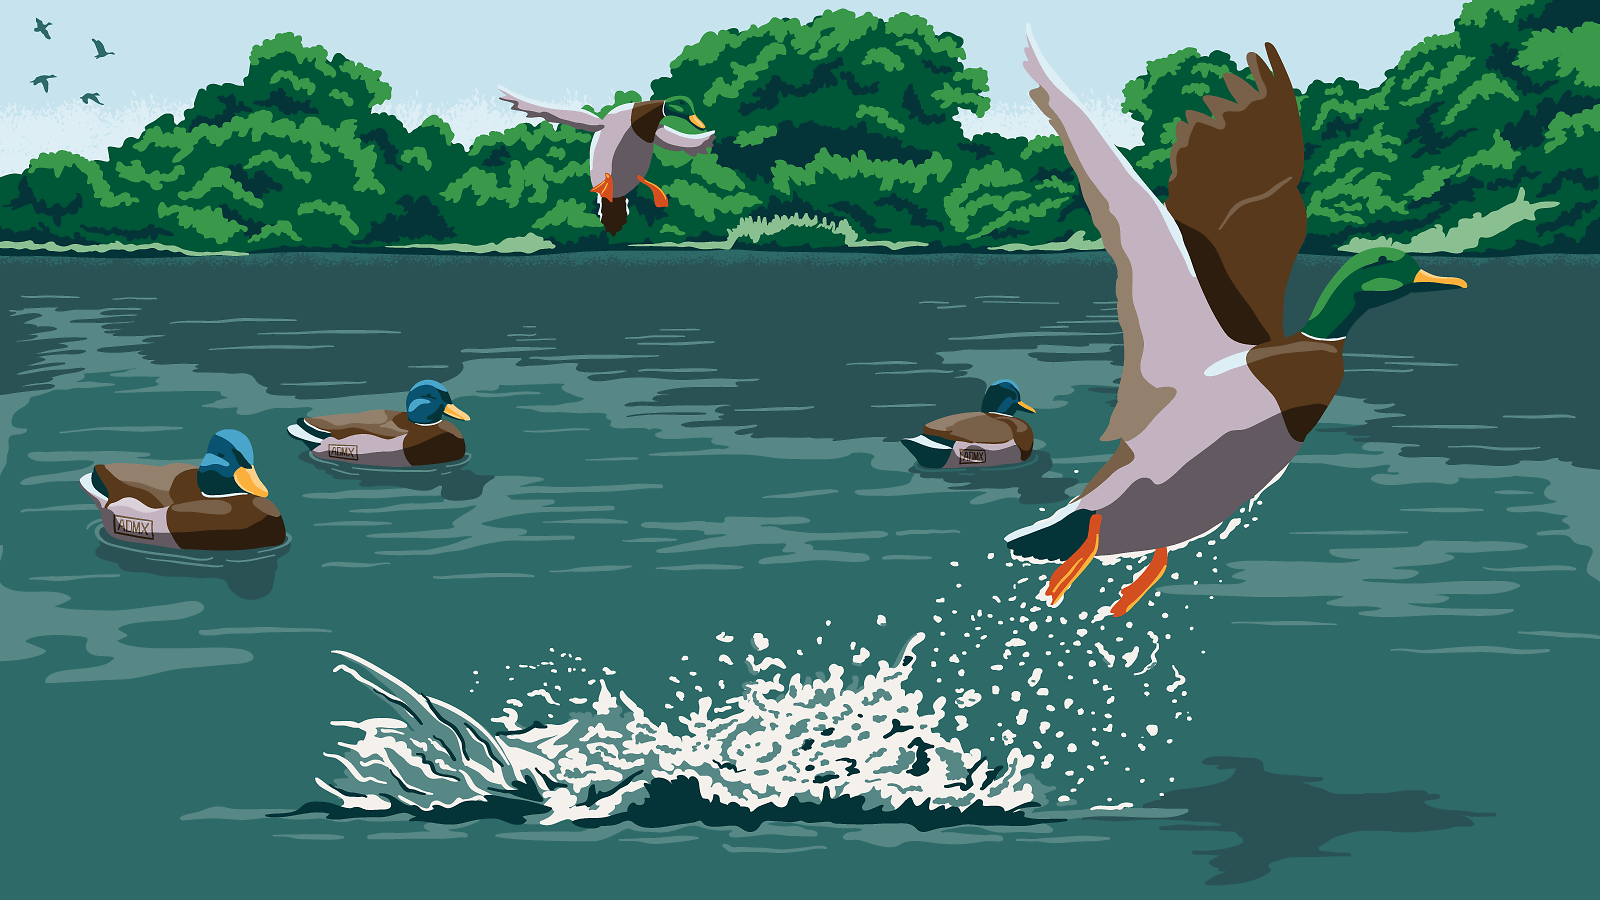 Illustration of ducks and decoys on a river